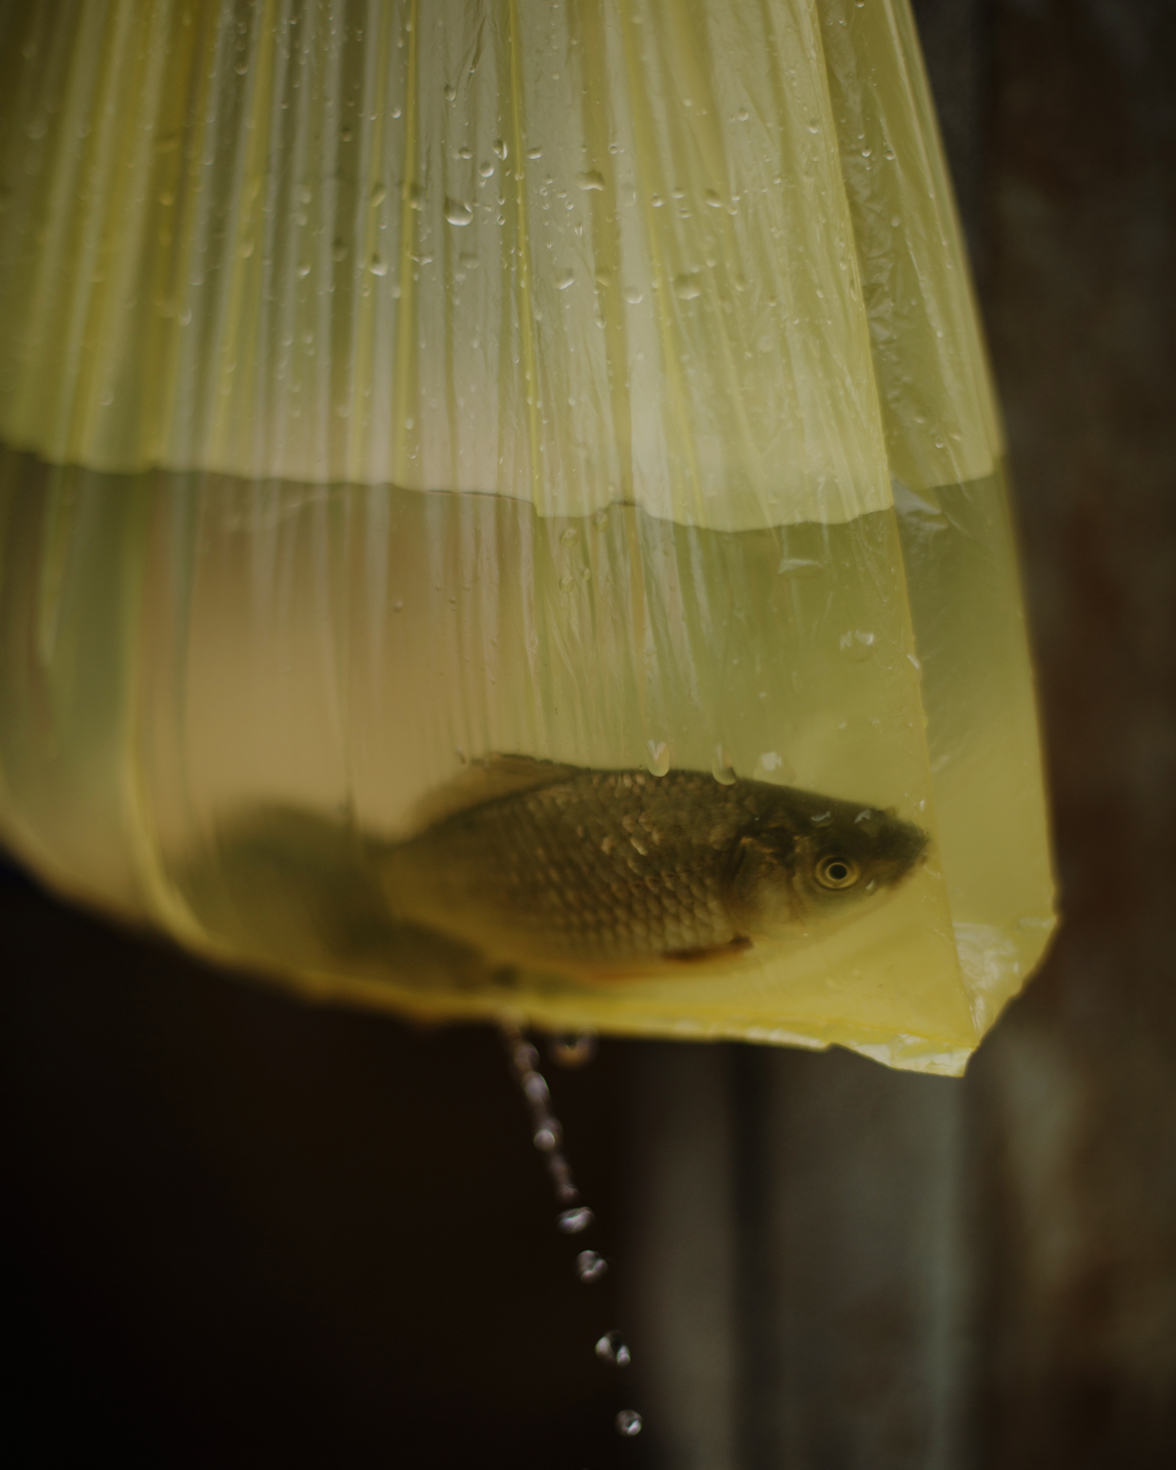  Gorelovka. In the yard of an Adjarian family, a fish in a holed plastic bag. 